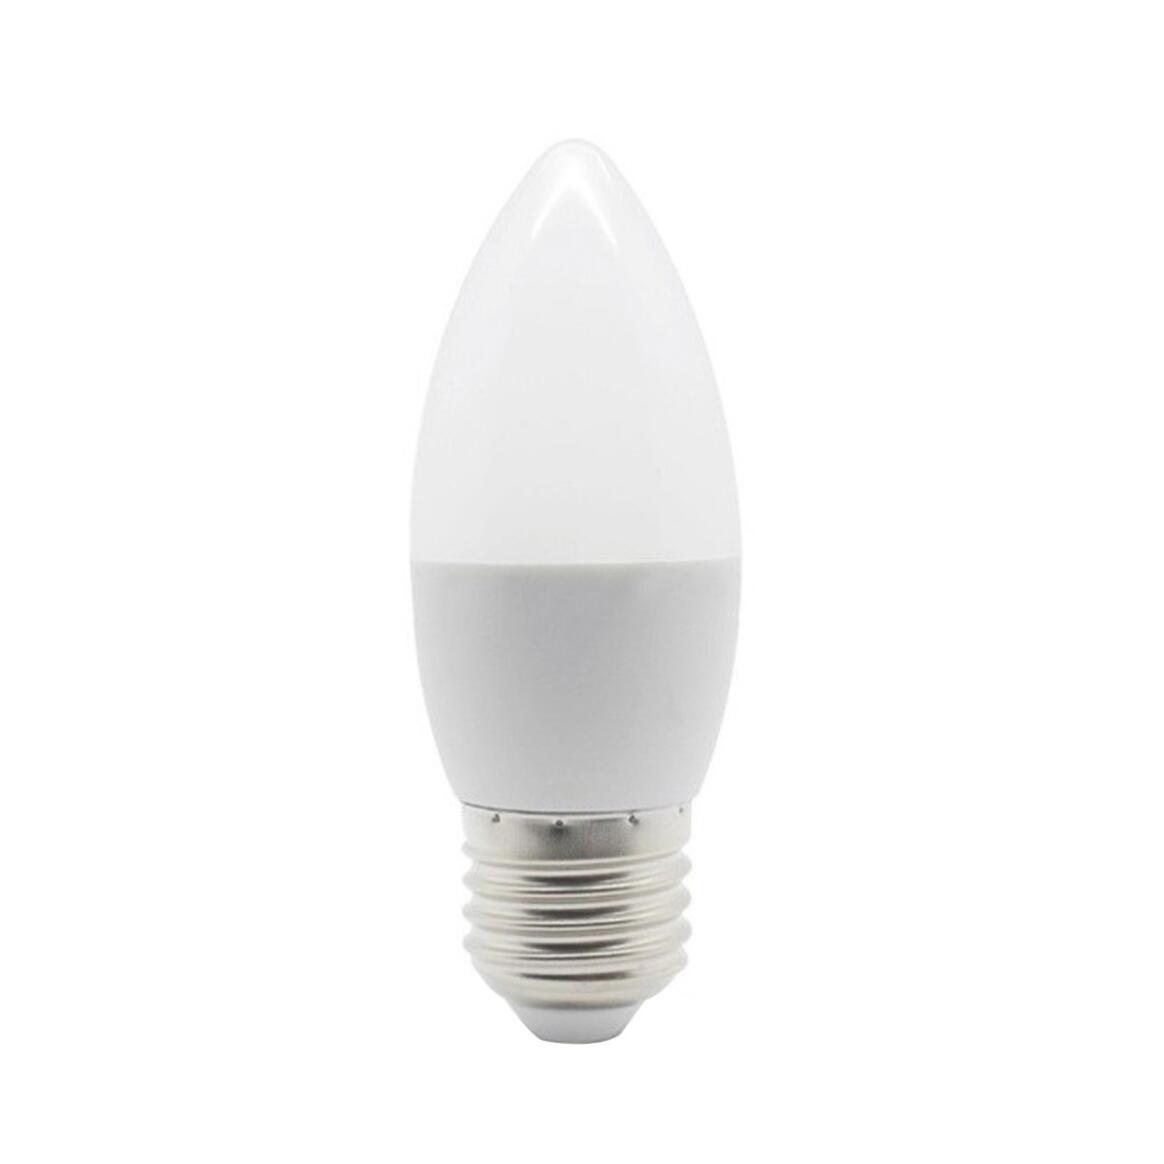 LED Candle Bulb Warm White Dimmable E27 5W 2700k 380lm 10cm main product image